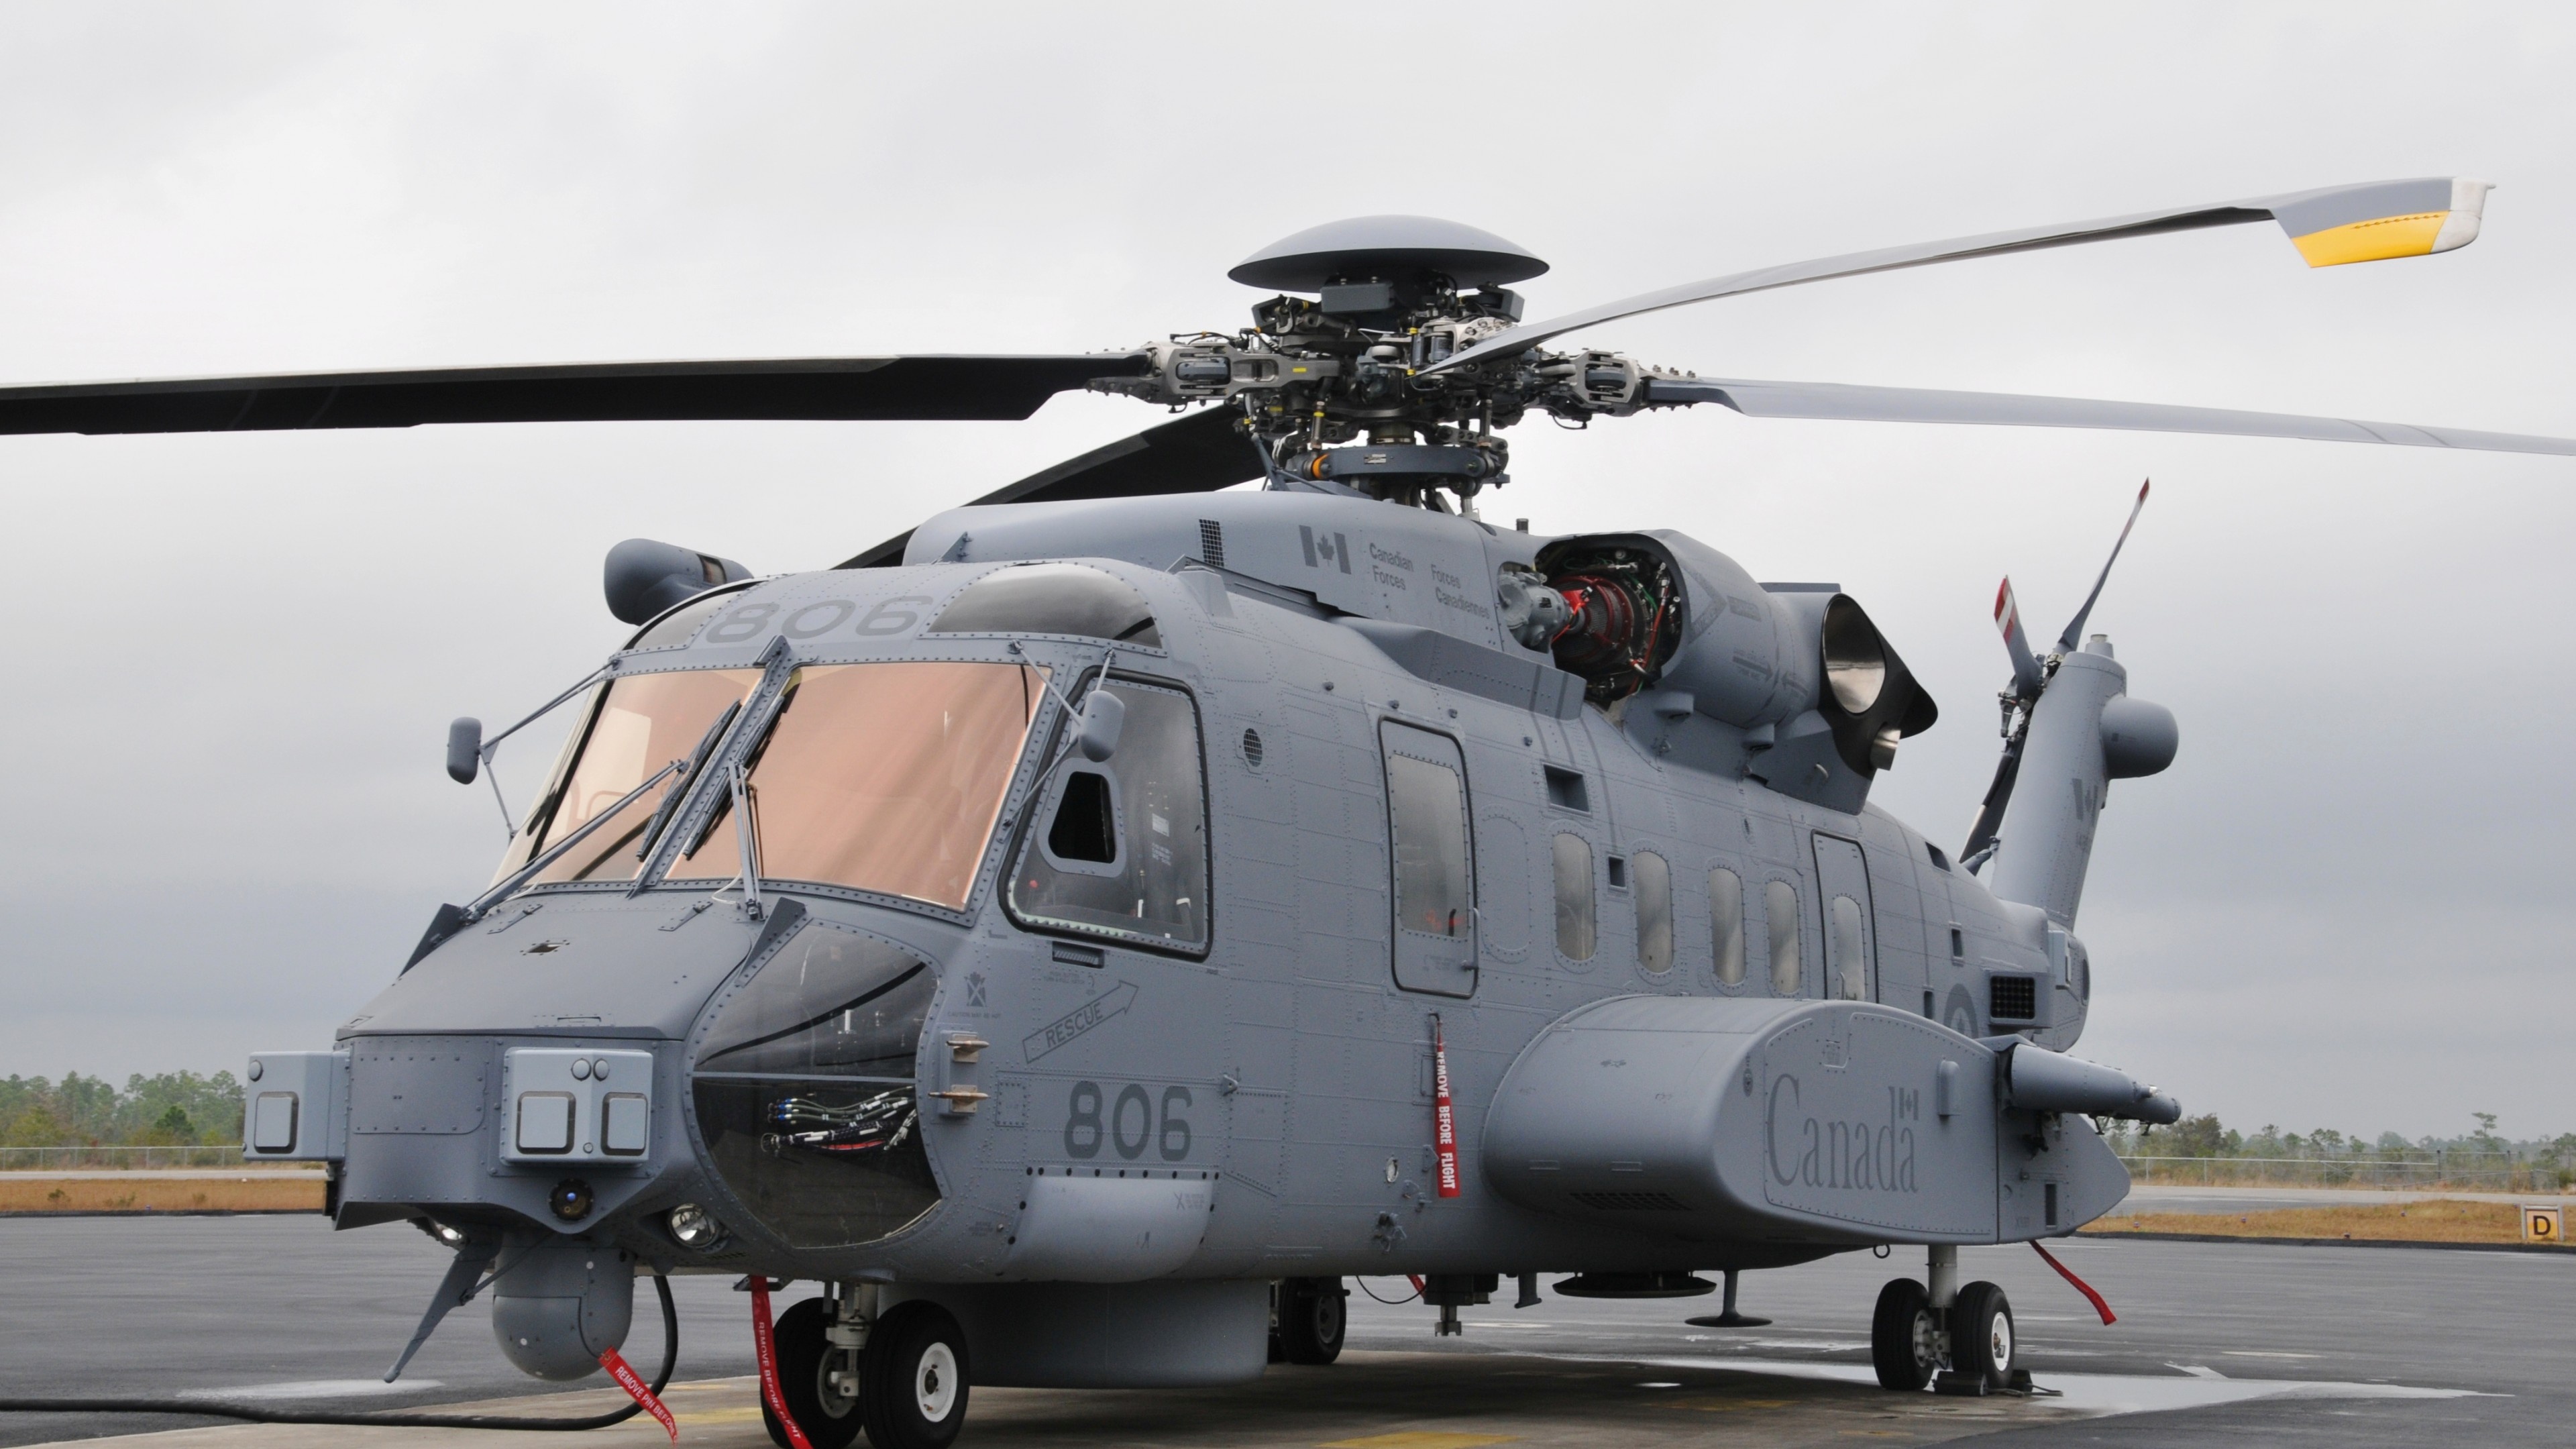 Wallpaper Sikorsky CH-148 Cyclone, AgustaWestland, attack helicopter, British Army, Britain, Military #7886 3840x2160